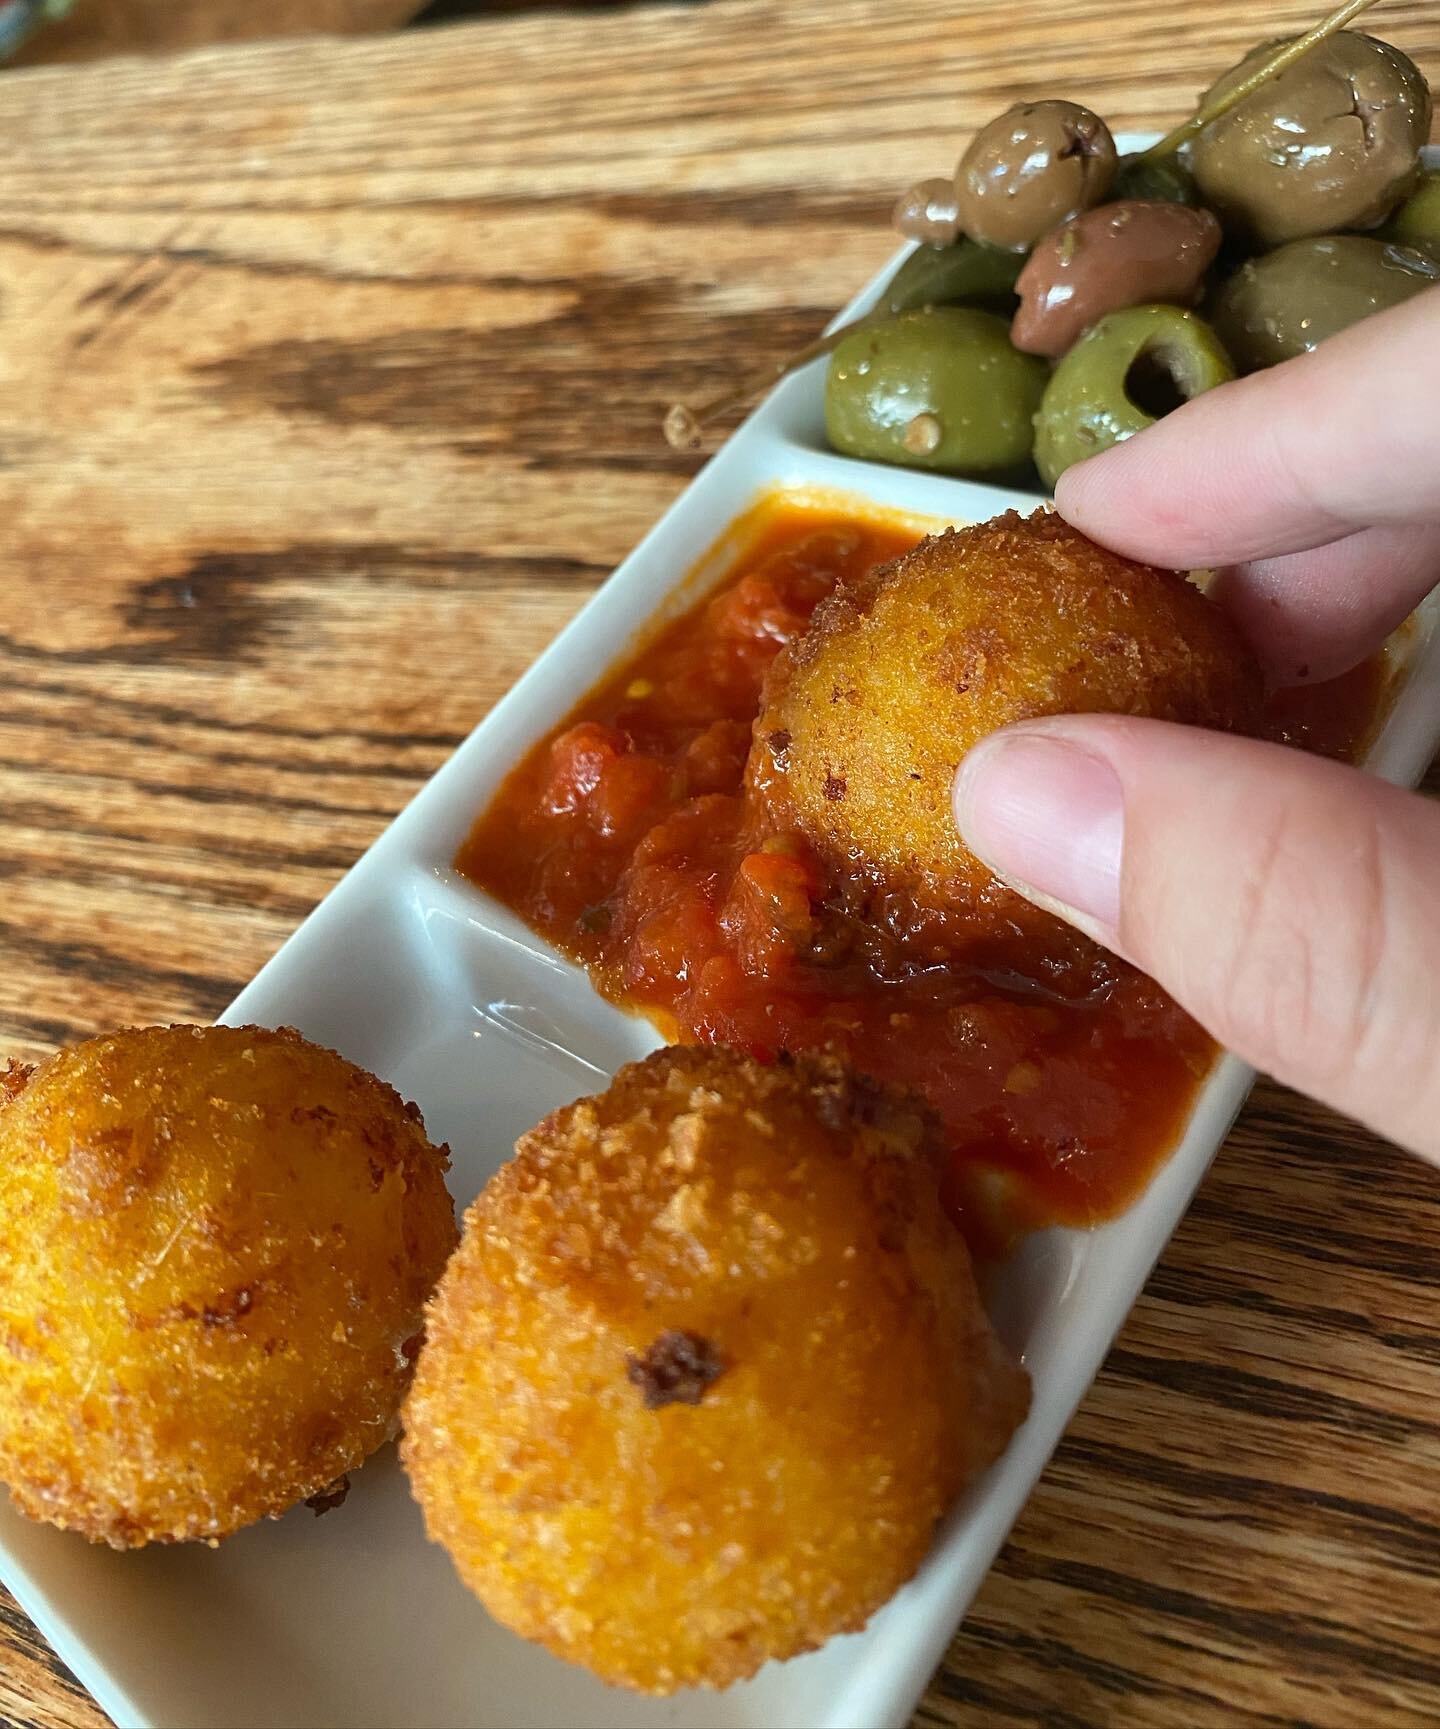 Stop by for our crispy Sicilian style Arancini with homemade tomato sauce, pair it with a glass of Aperol spritz and enjjjoy this beautiful Friday evening!🥳

#fridaynightdinner #italianfood #arancini #aperolfordays#celebratelife